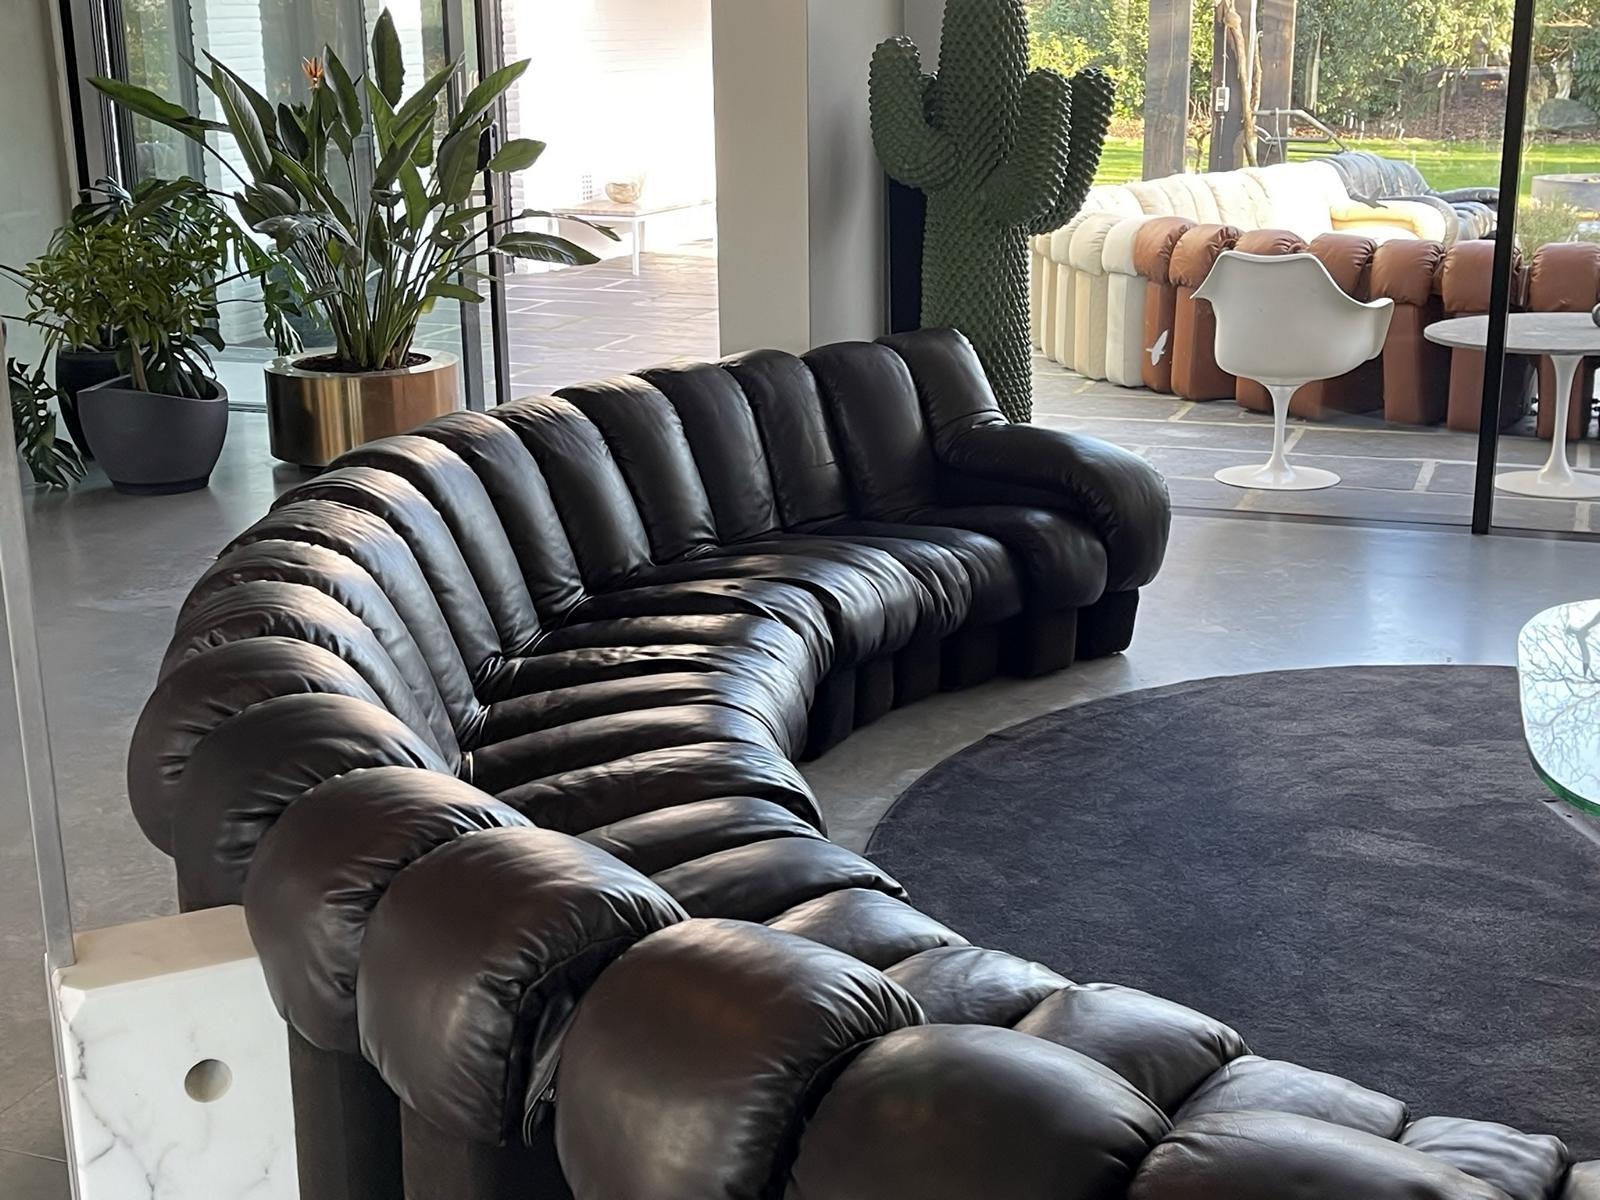 Ds-600 Sofa for De Sede Leather by Berger, Peduzzi-Riva, Ulrich, Vogt 2